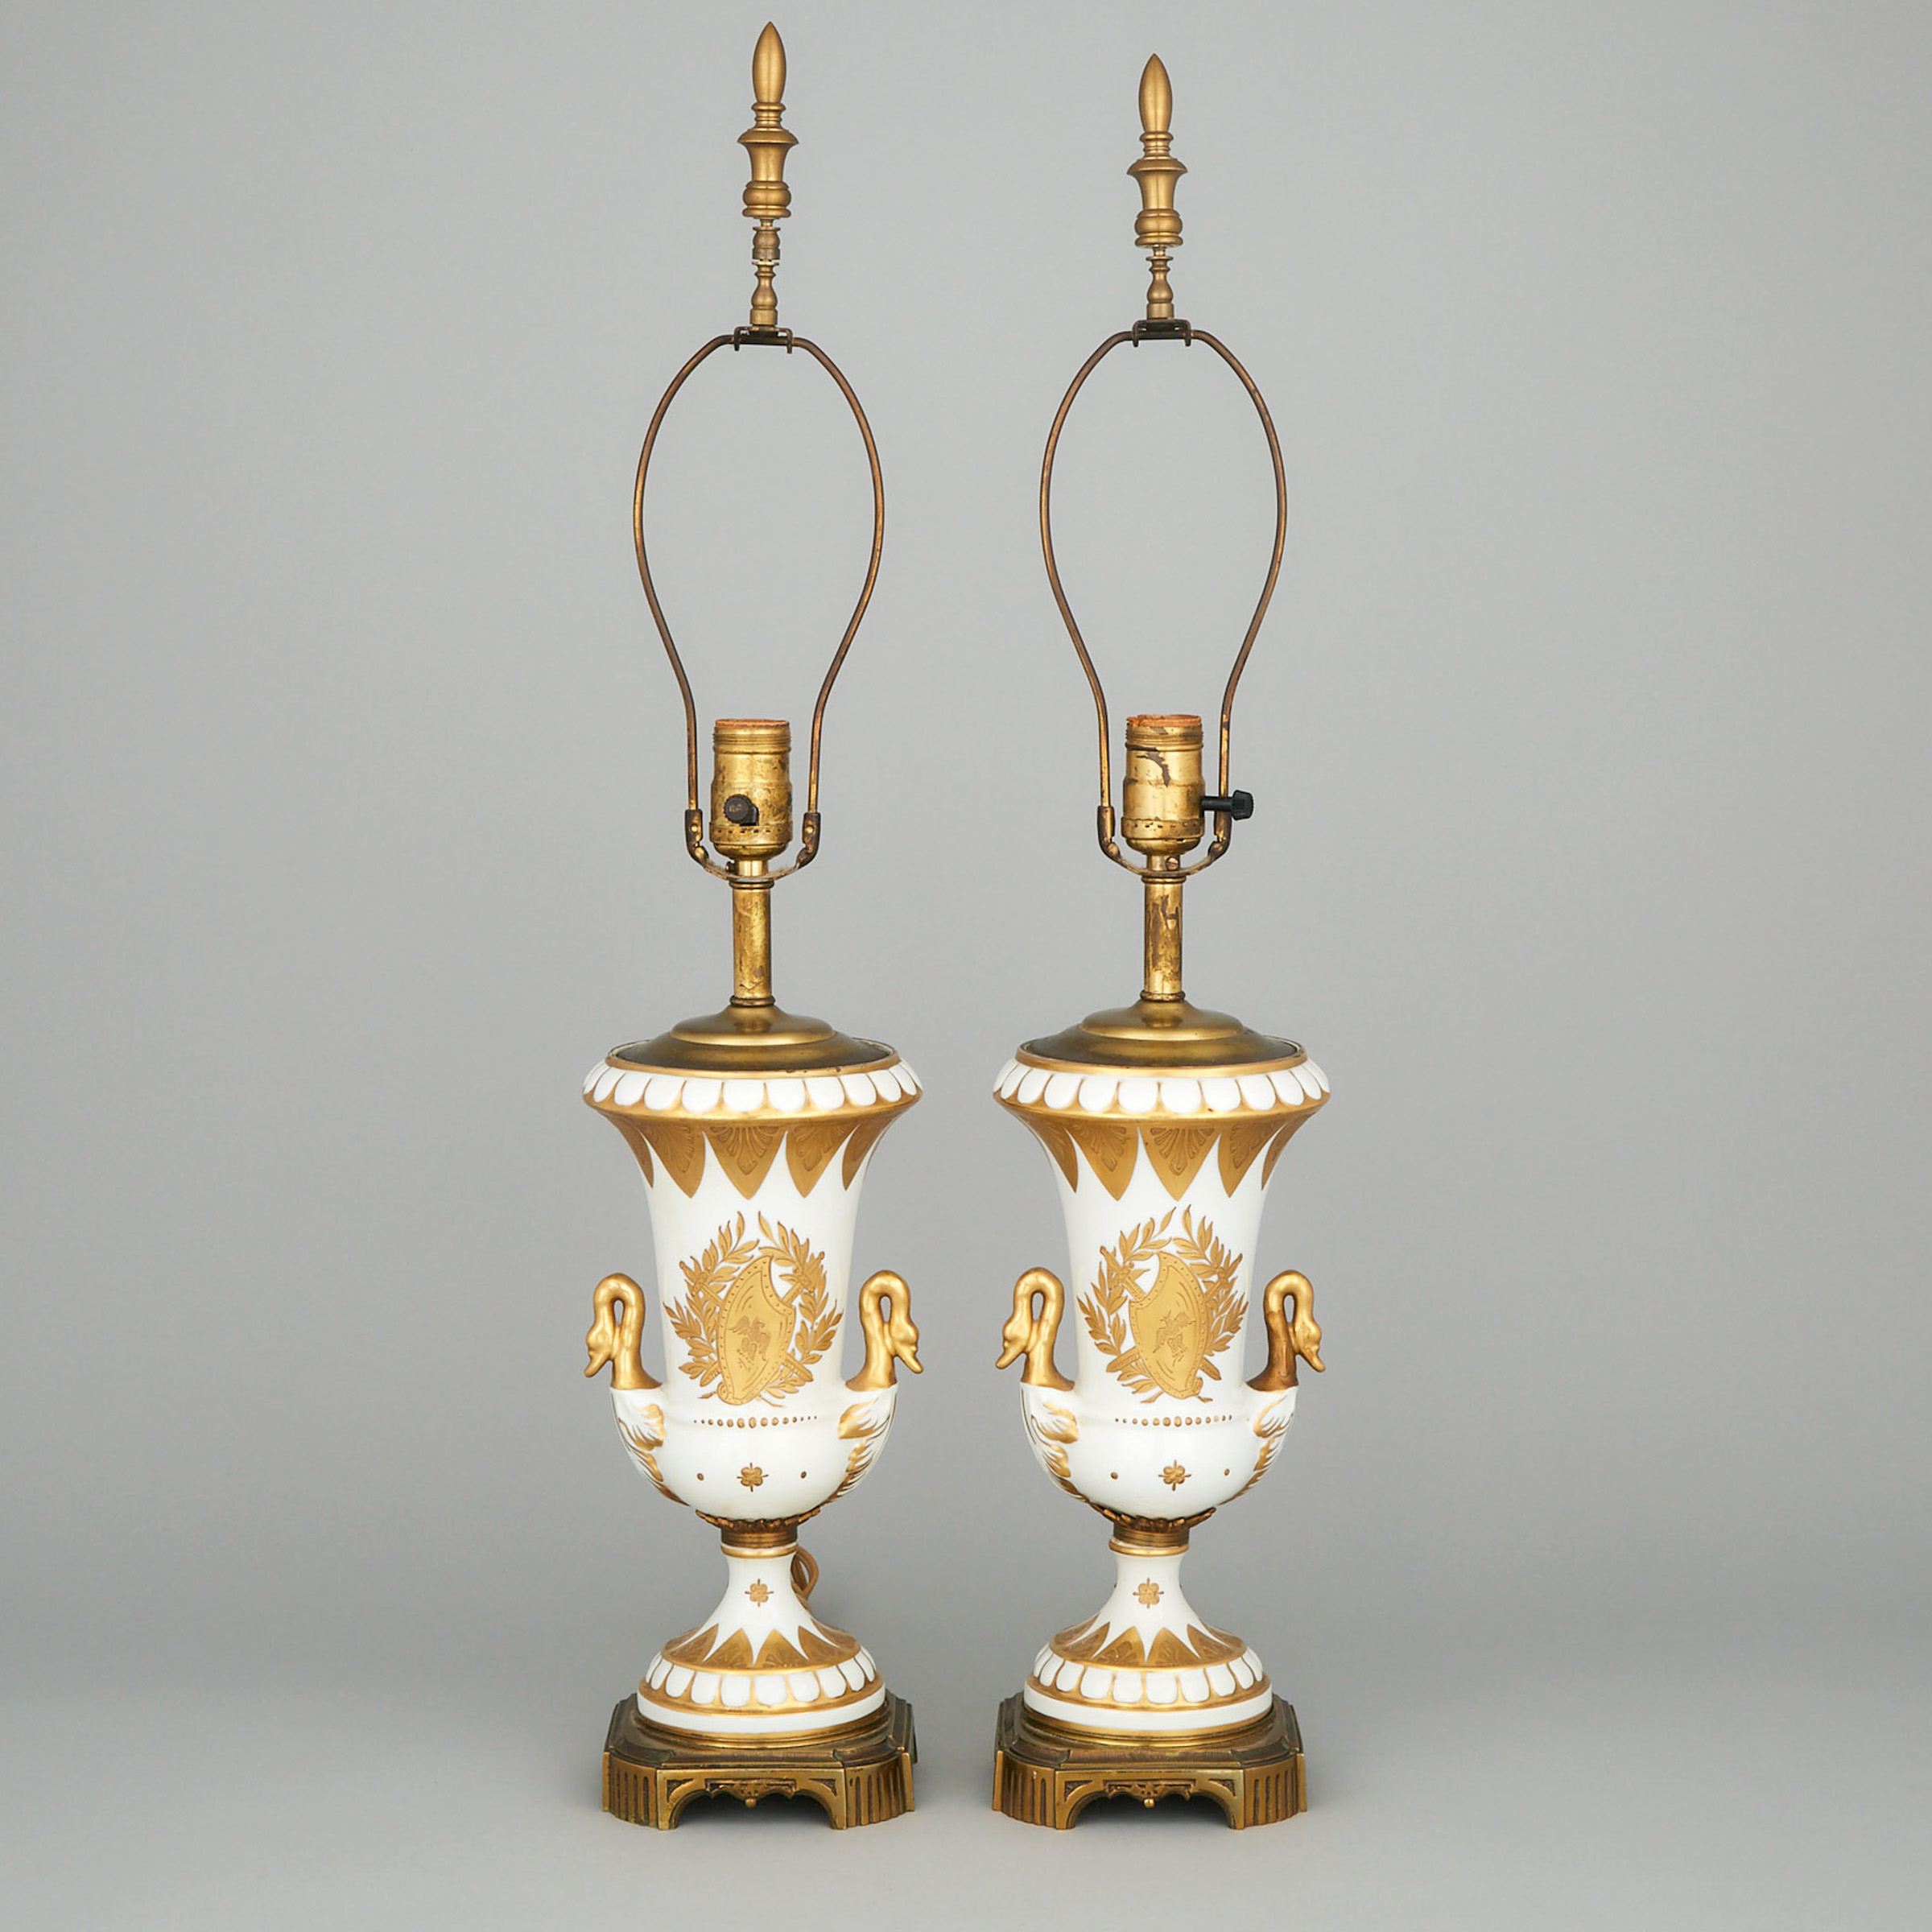 Pair of French Porcelain Table Lamps, 20th century